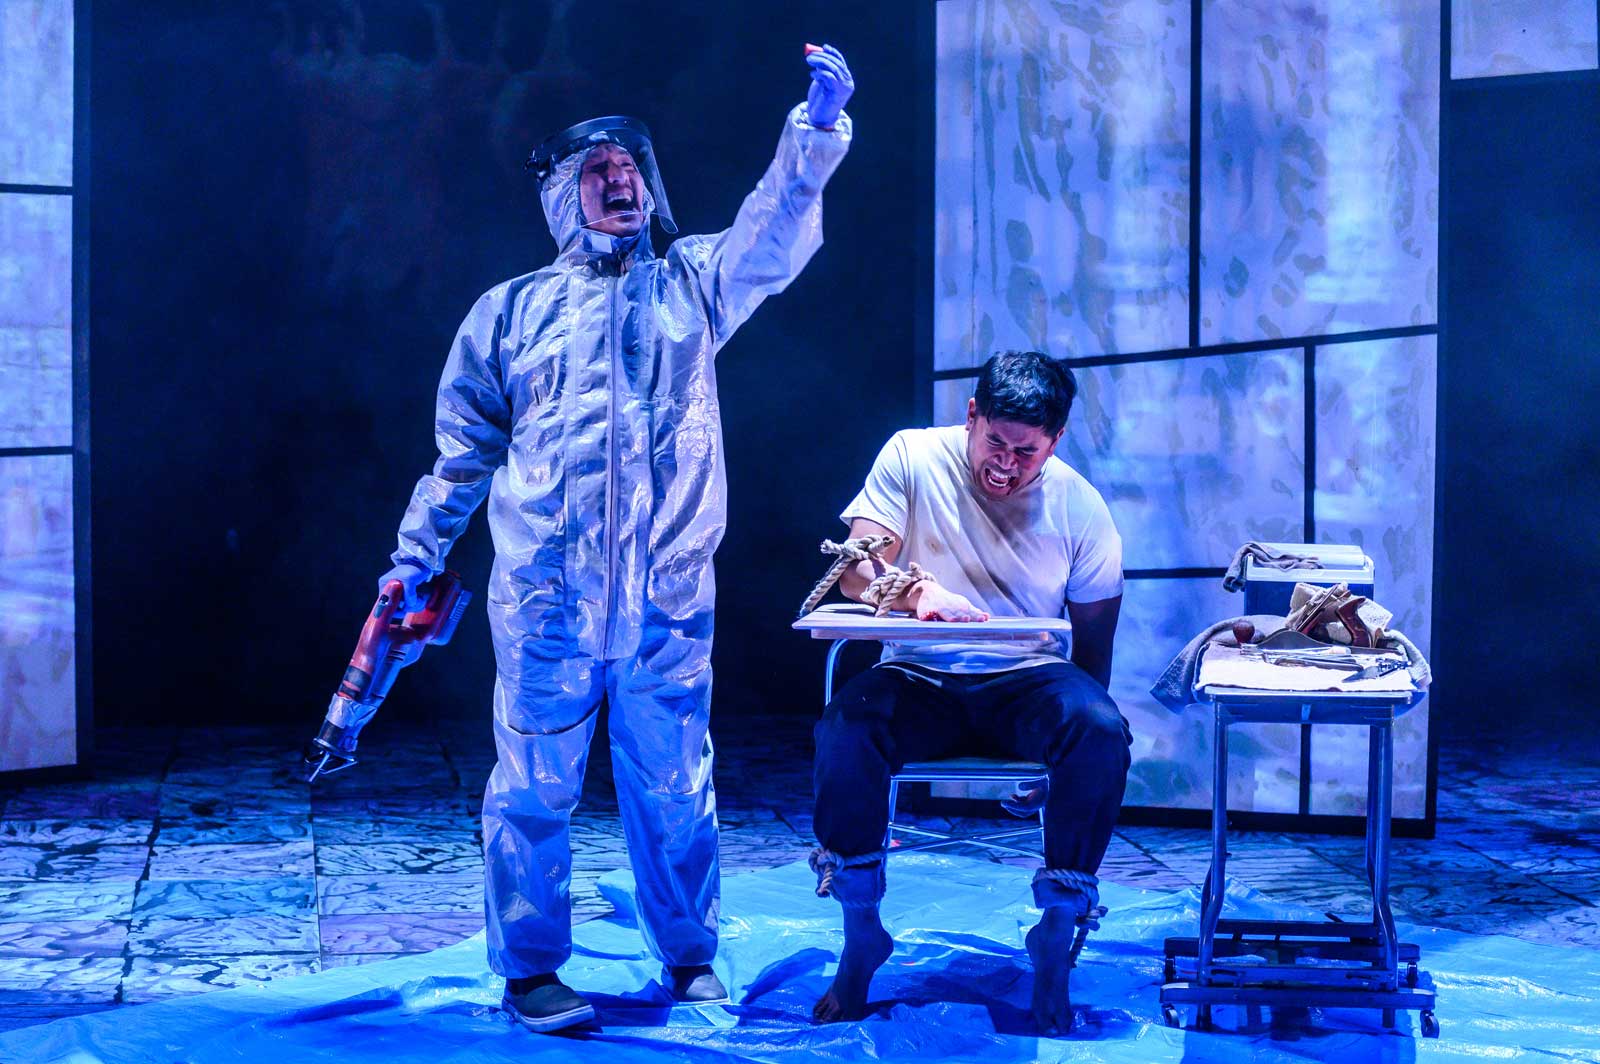 A man in a bio hazard suit holds something in the air while holding a reciprocating saw in the other hand while a man tied to a chair screams.